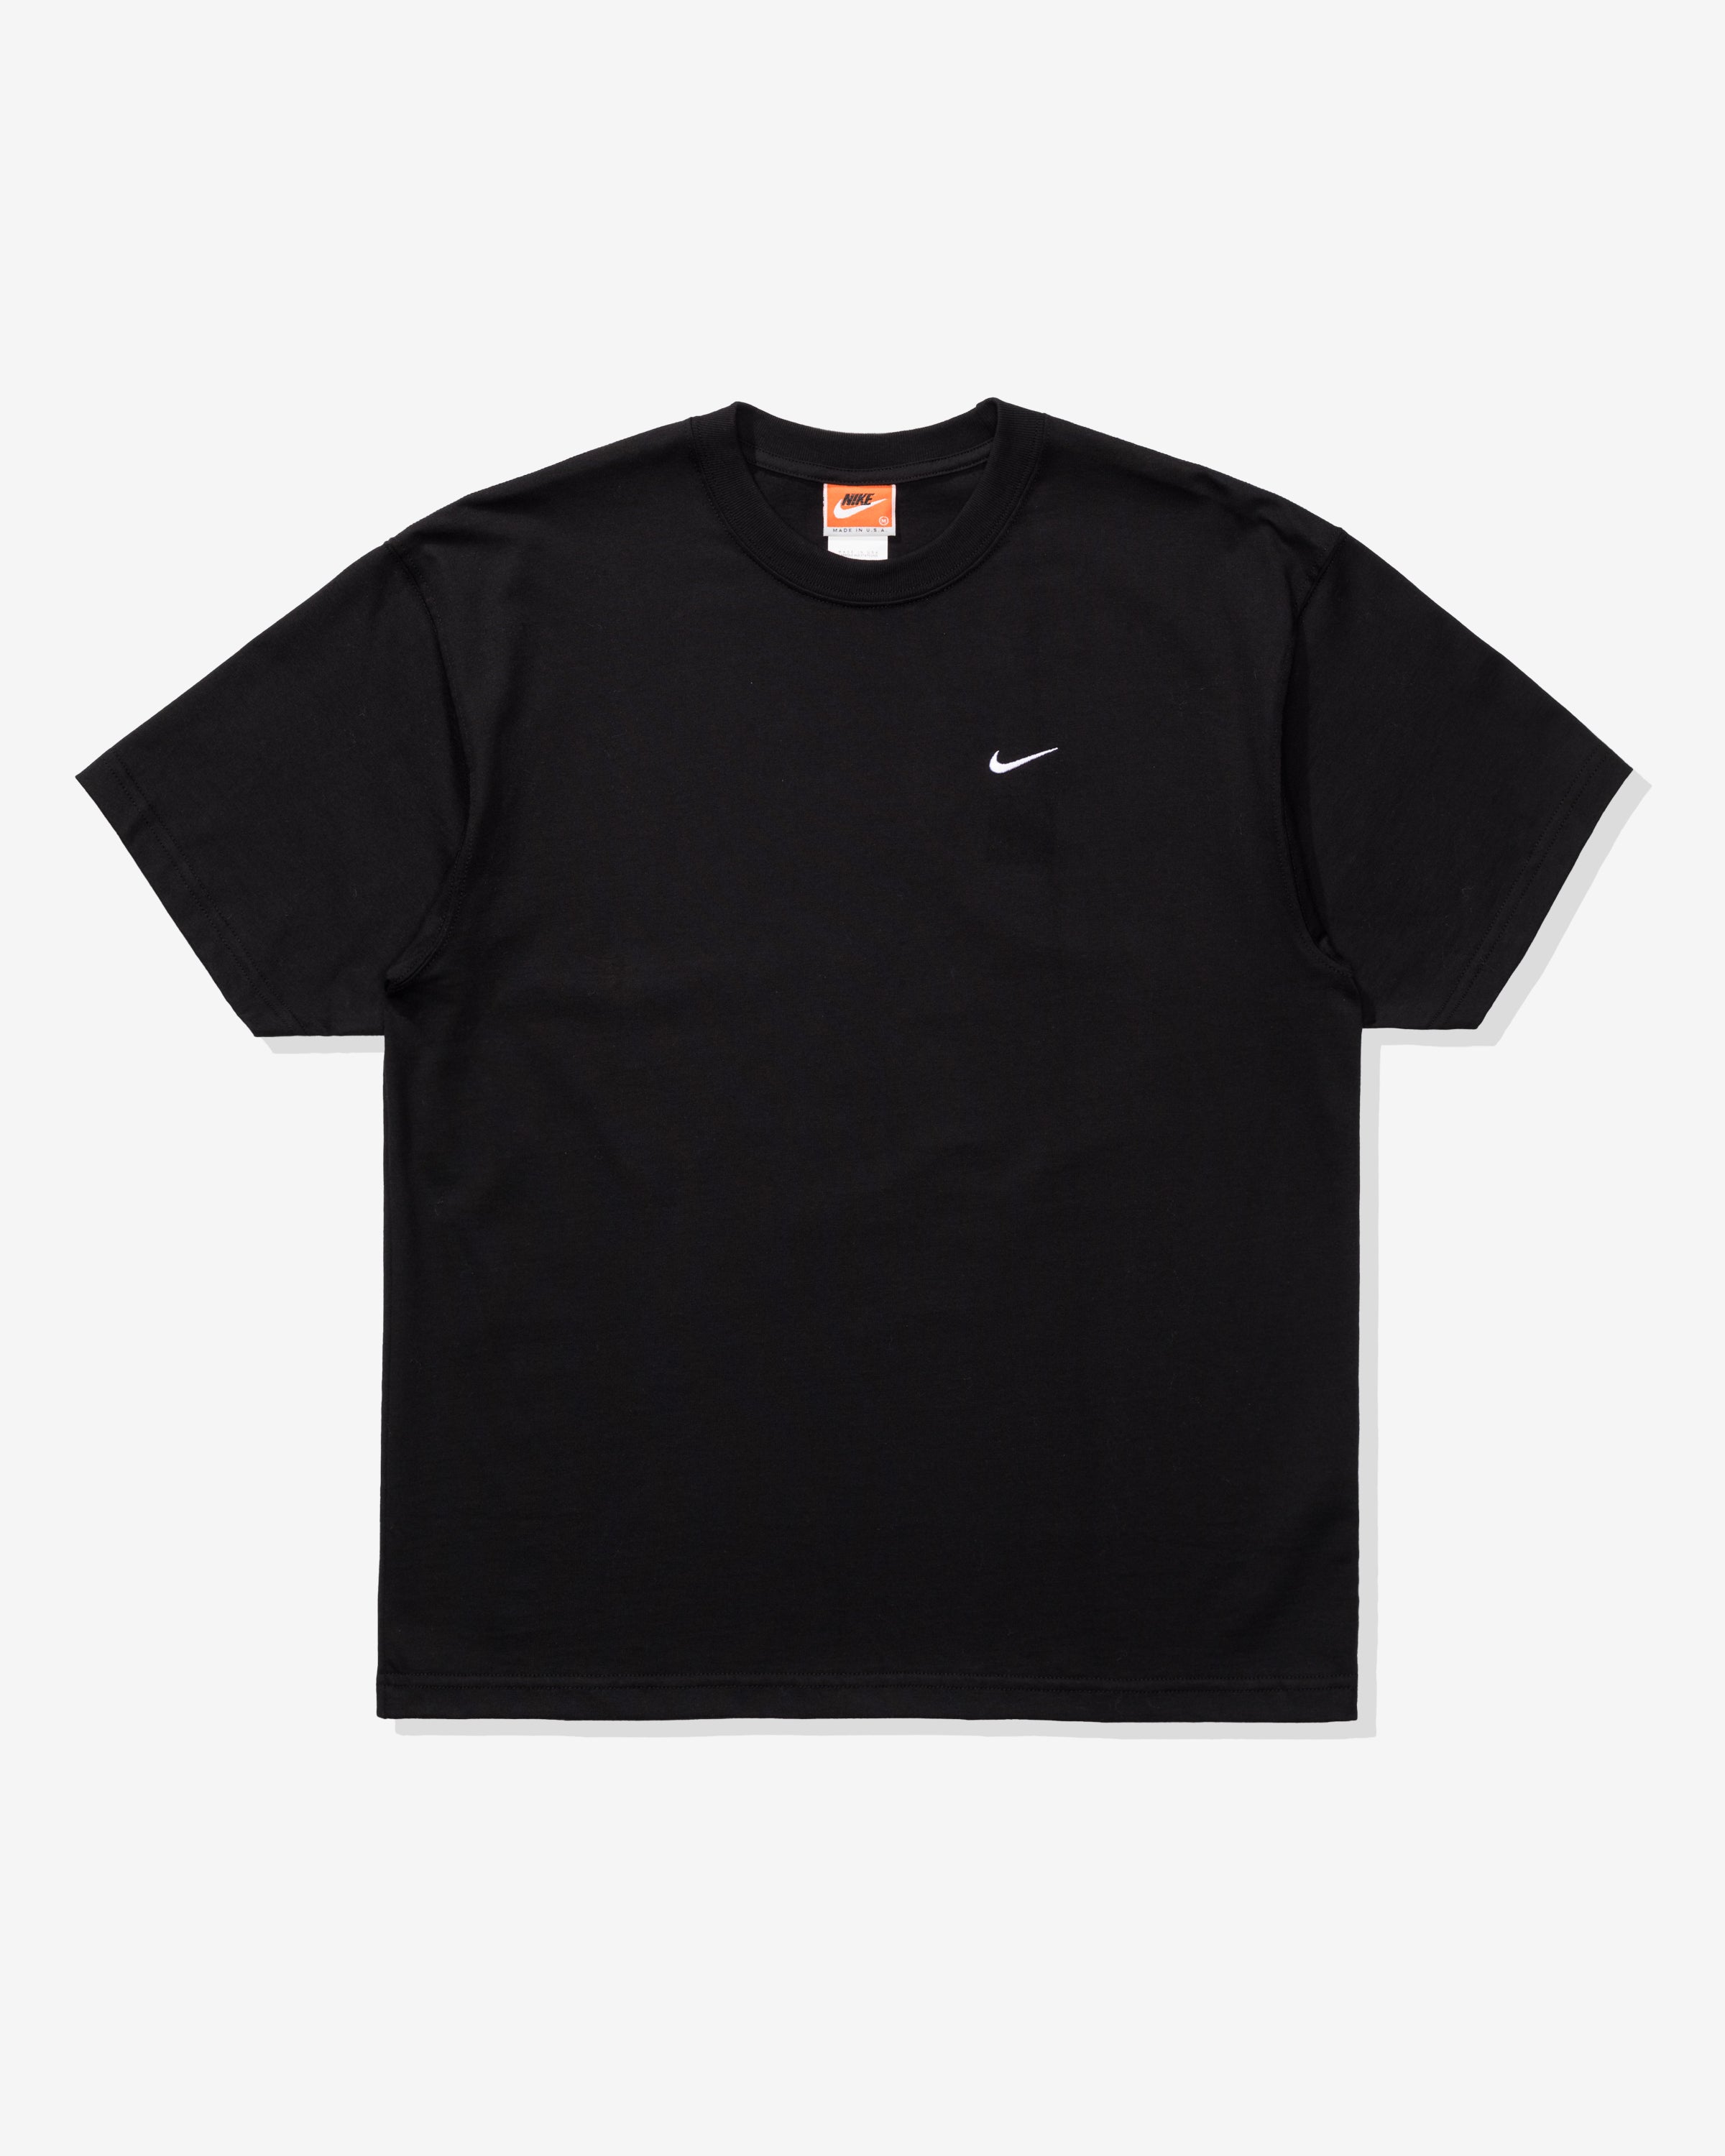 Poner a prueba o probar Personal siguiente NIKE NRG "MADE IN THE USA" TEE - BLACK/ WHITE – Undefeated